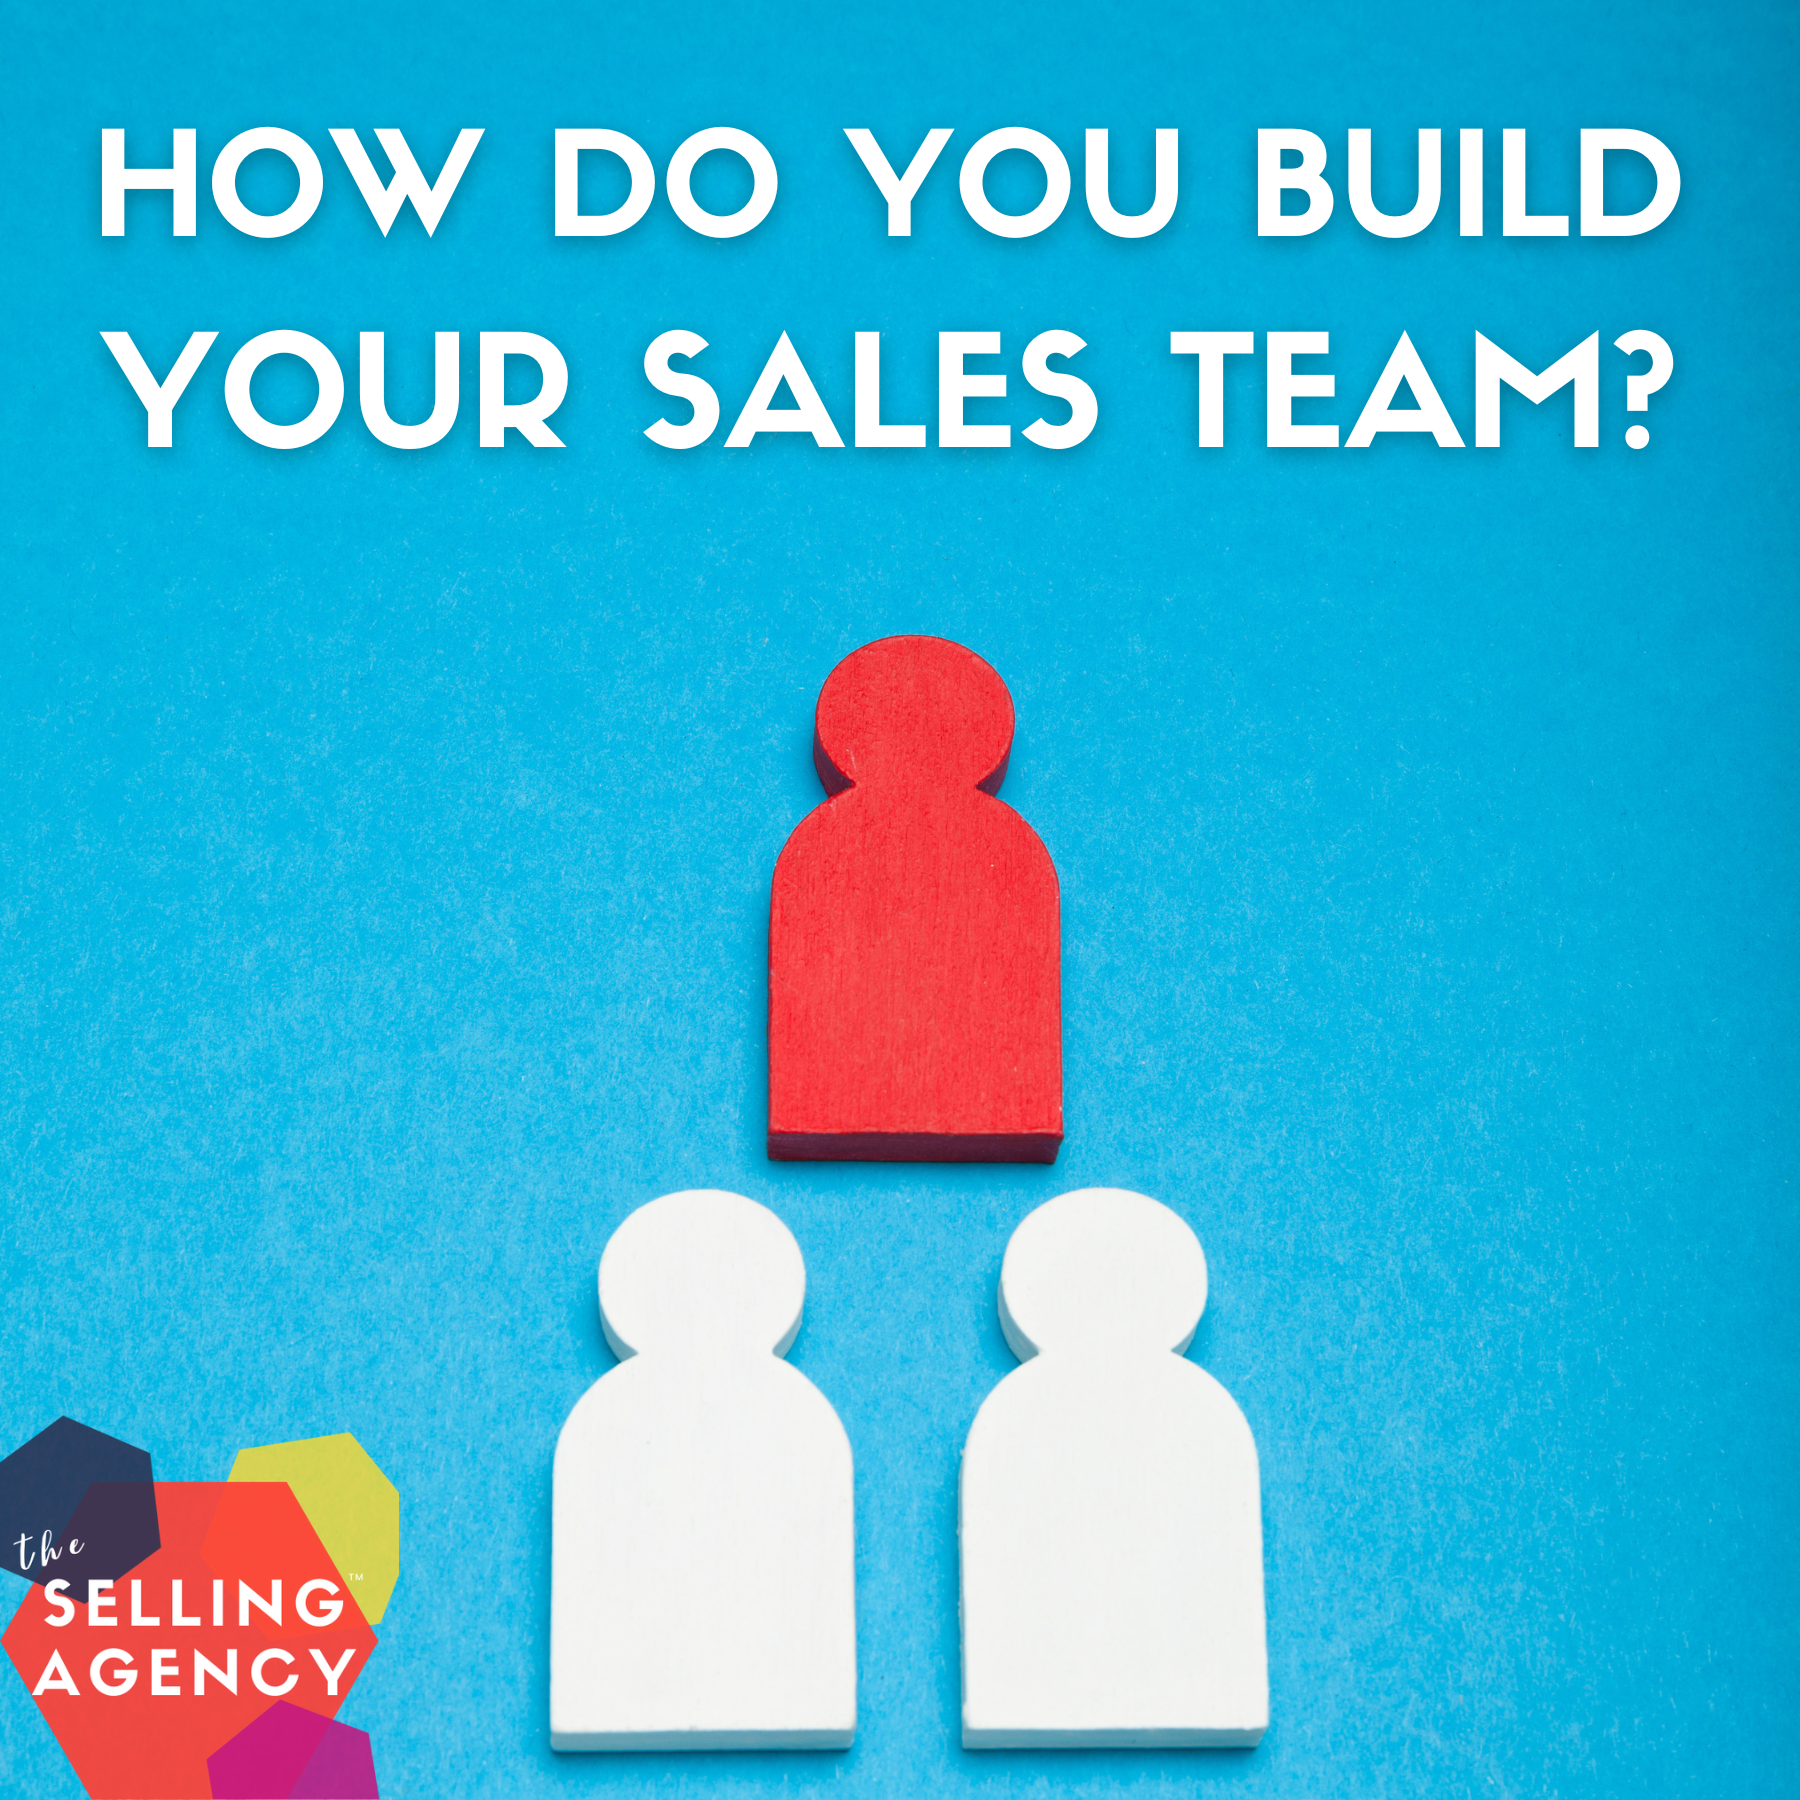 WHO DO YOU HIRE WHEN DO YOU FIRE HOW DO YOU BUILD YOUR SALES TEAM